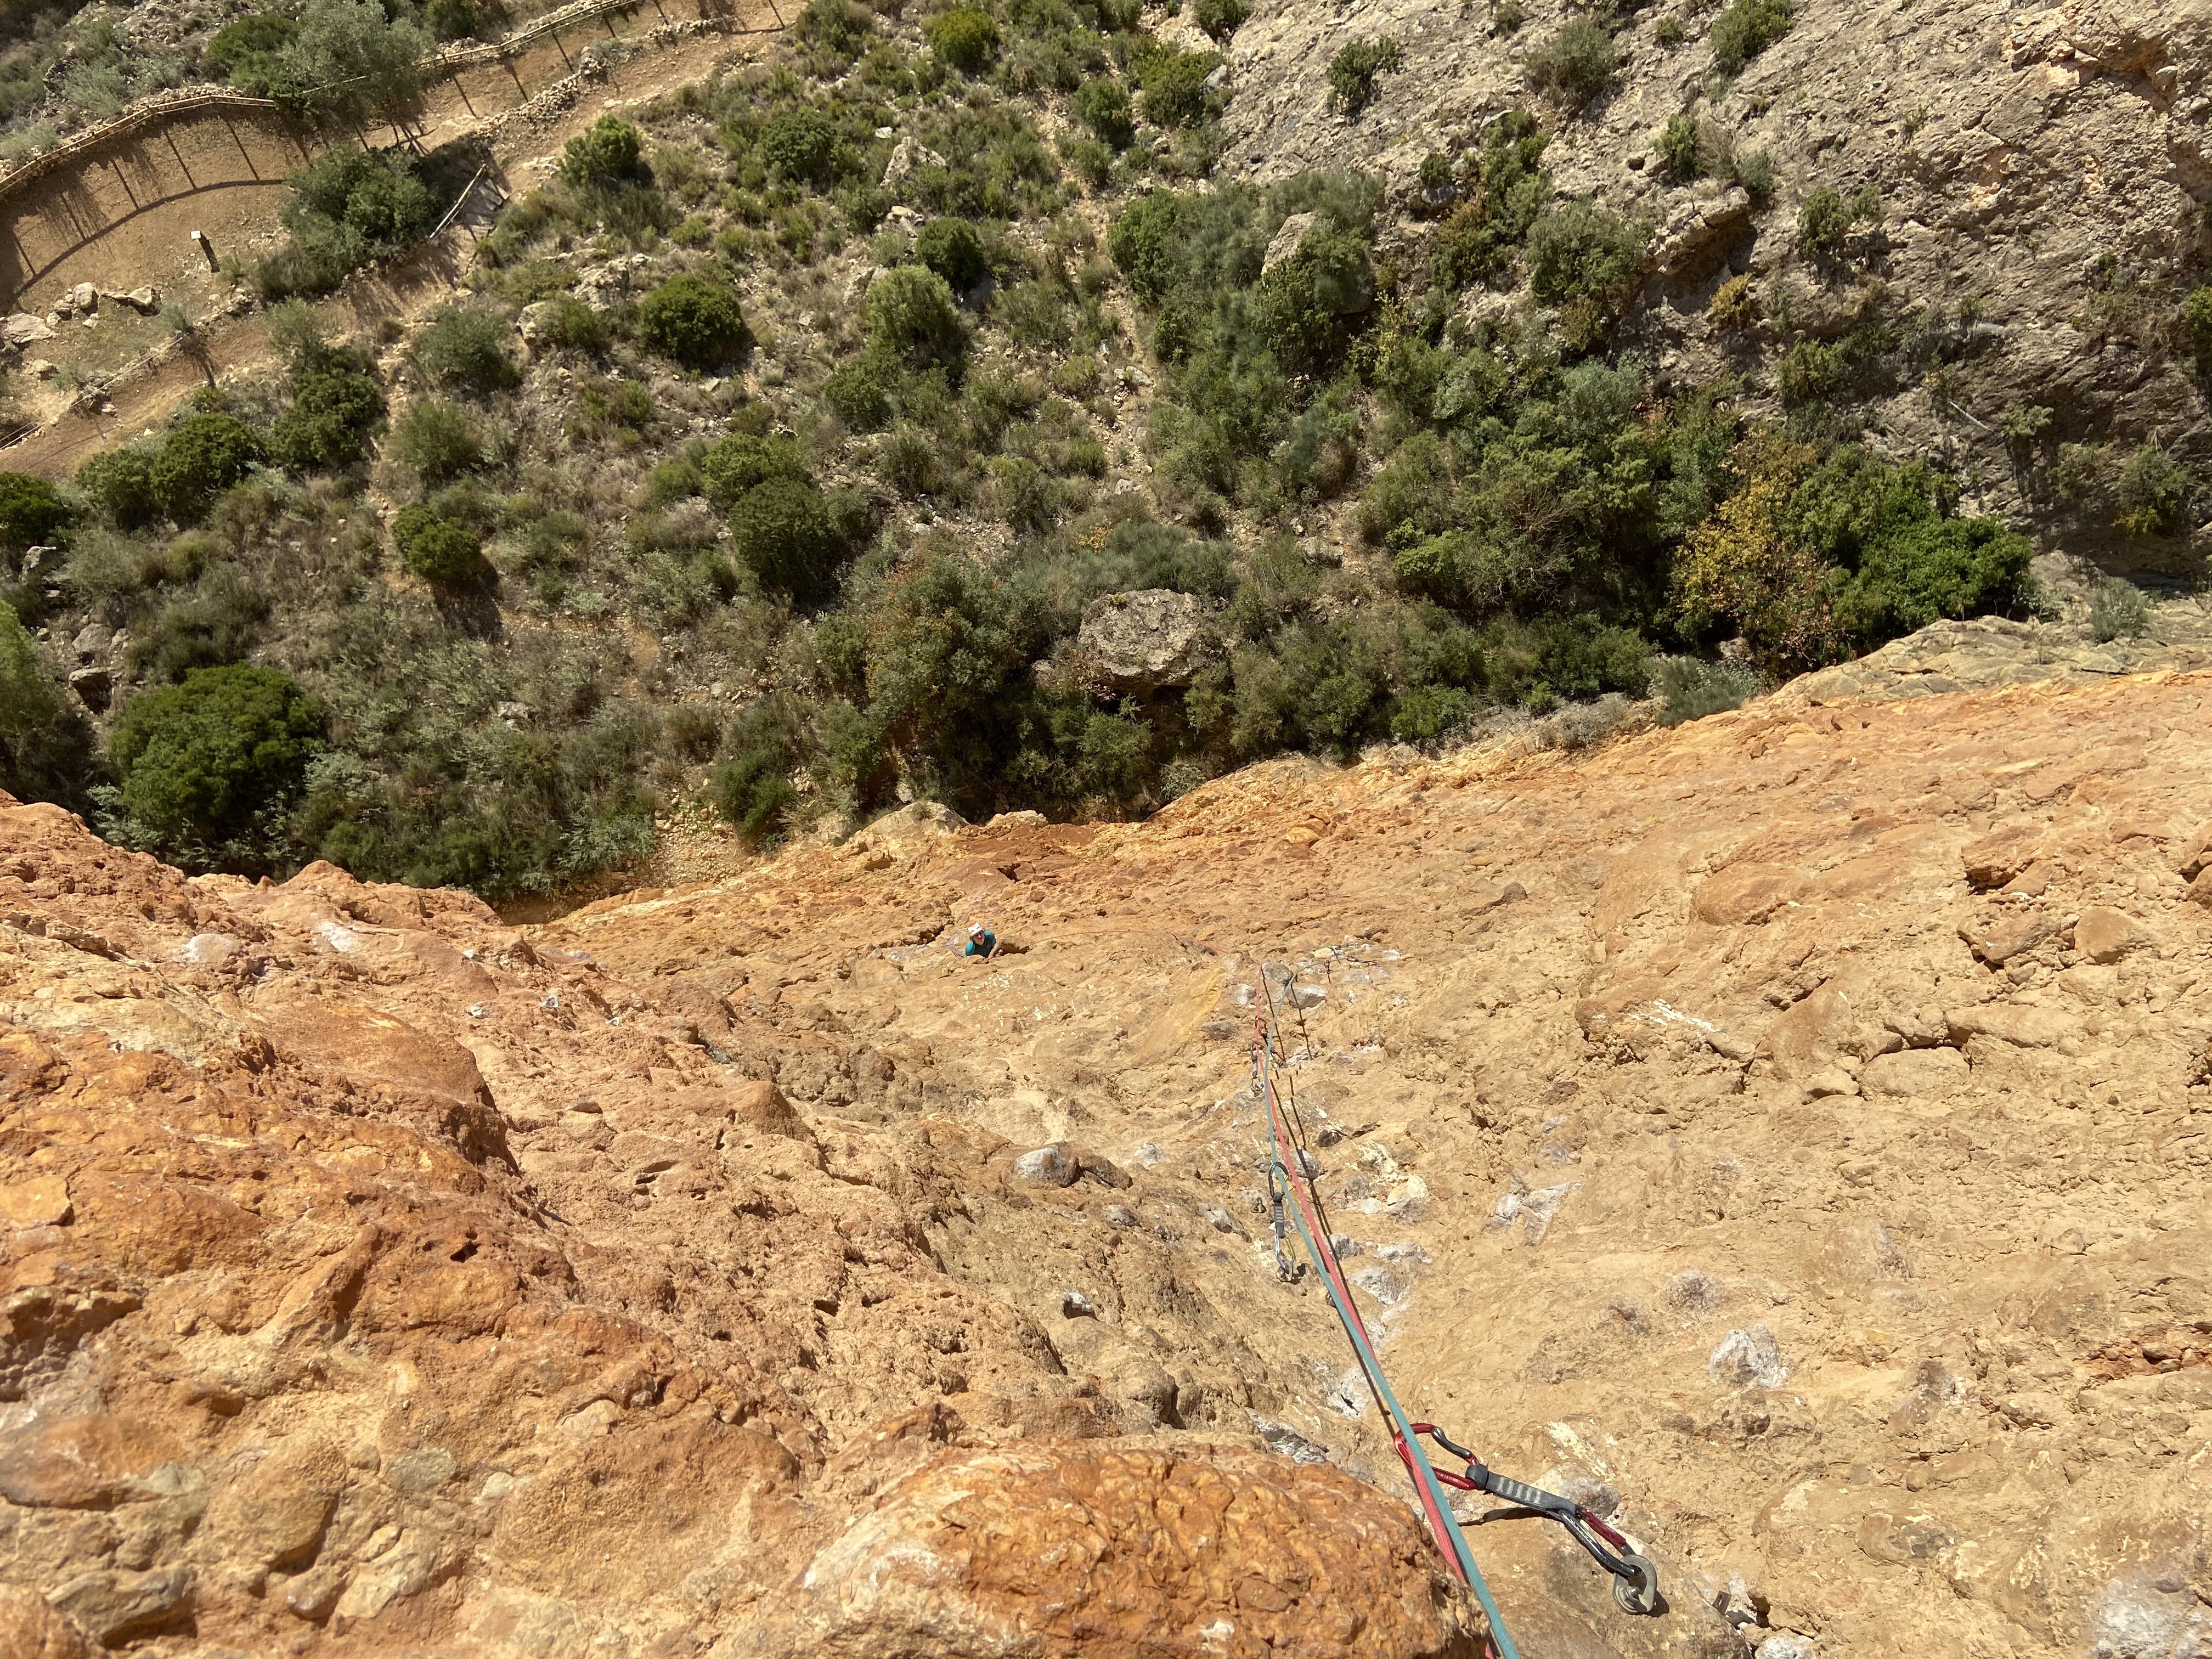 View looking down from the multi pitch route. There are lots of chalked "potatos" conglomerate rocks